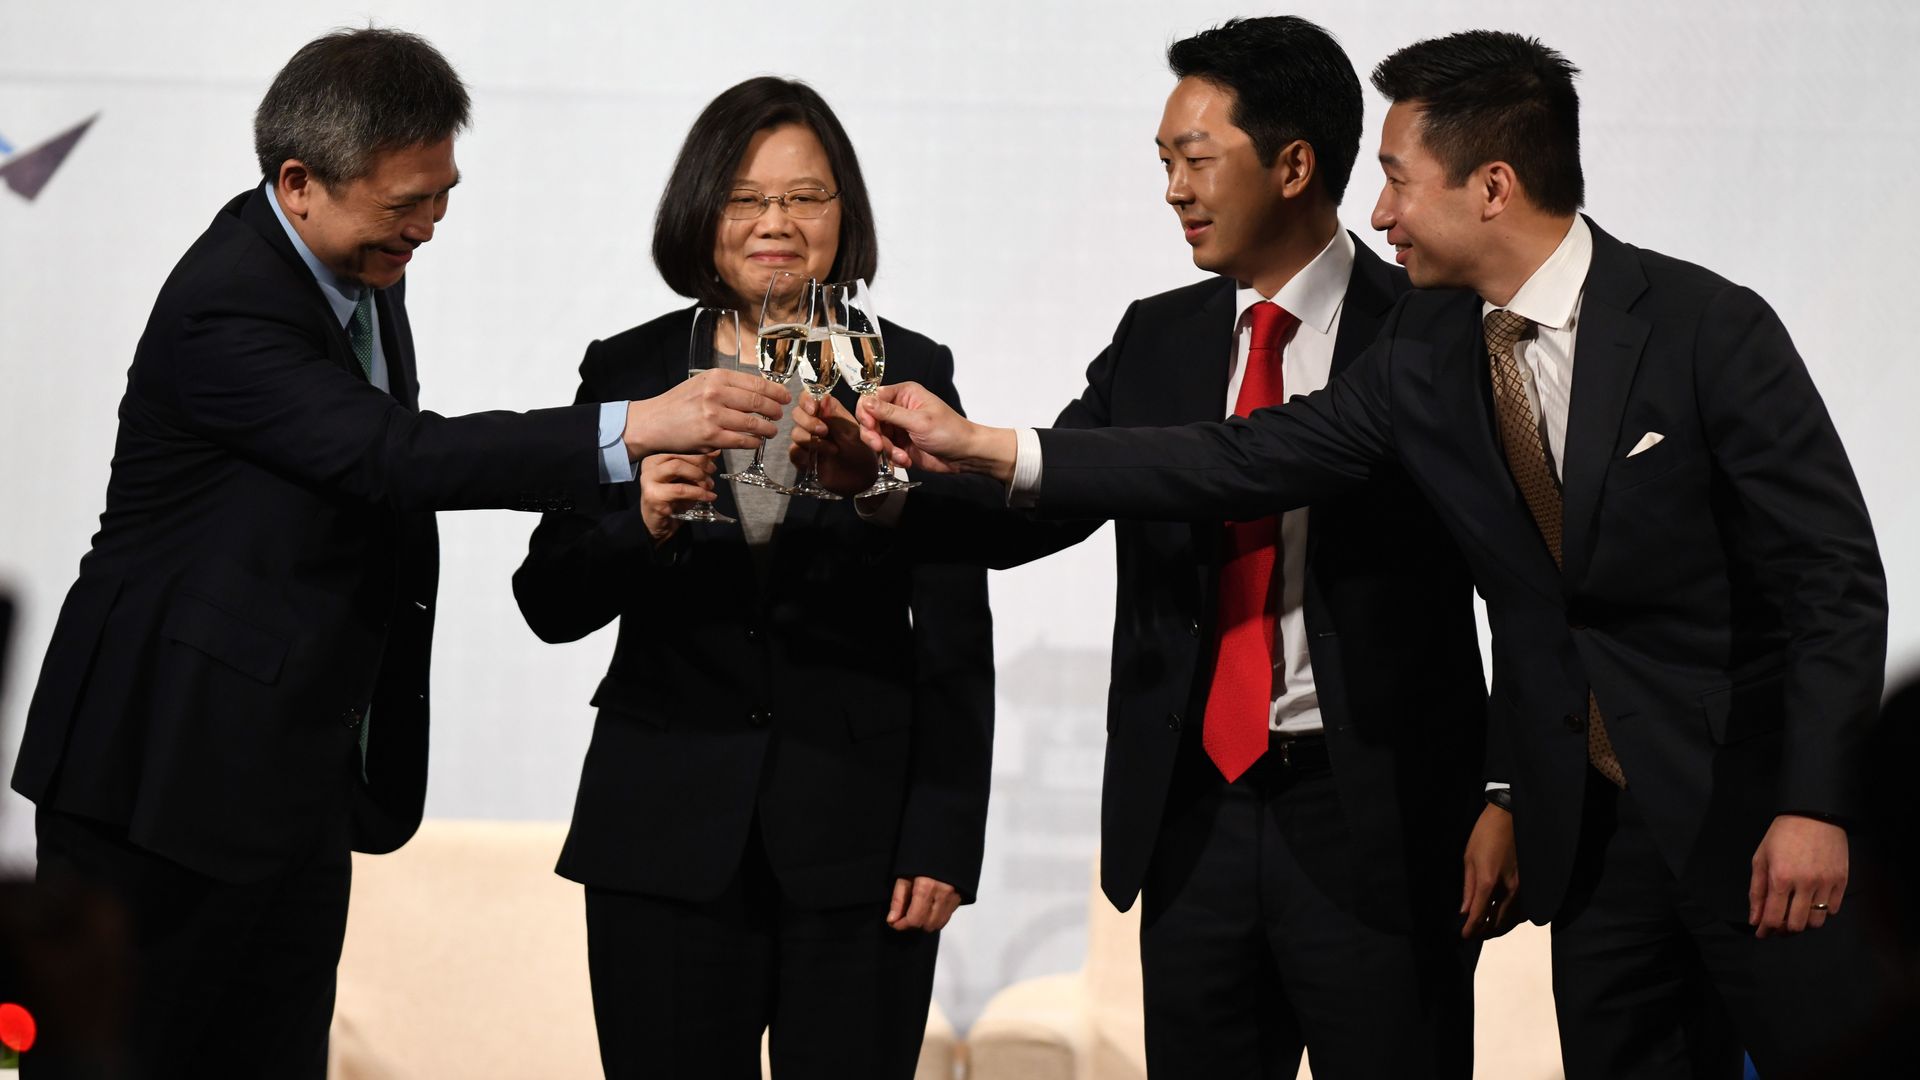 American Institute of Taiwan and U.S. State officials giving a toast in Taiwan in March 2018